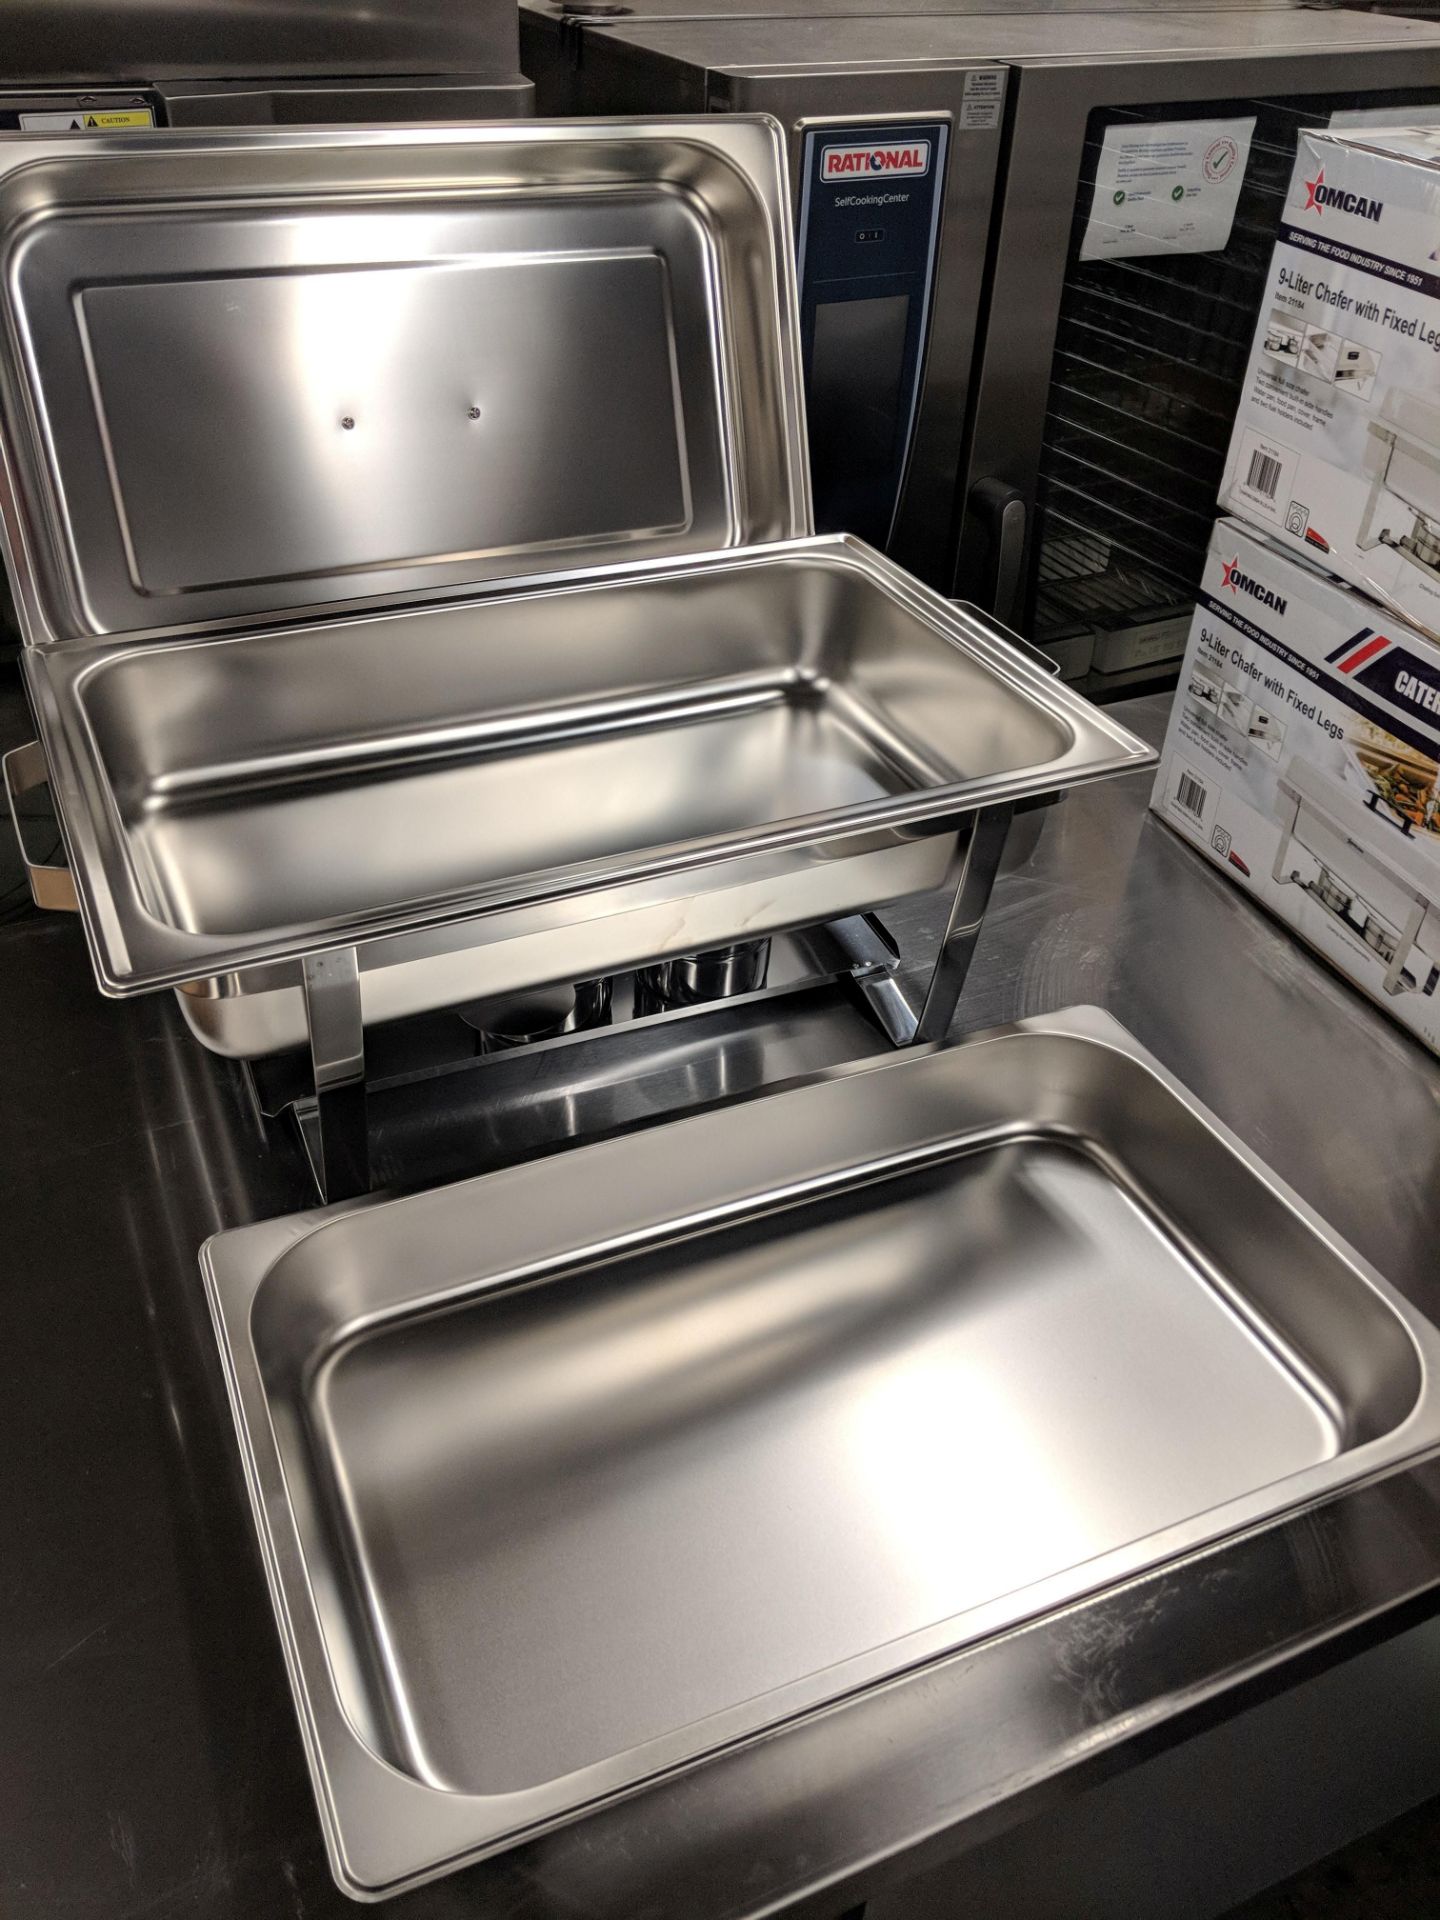 9L Stainless Chafing Dish with Fixed Legs - Image 2 of 5